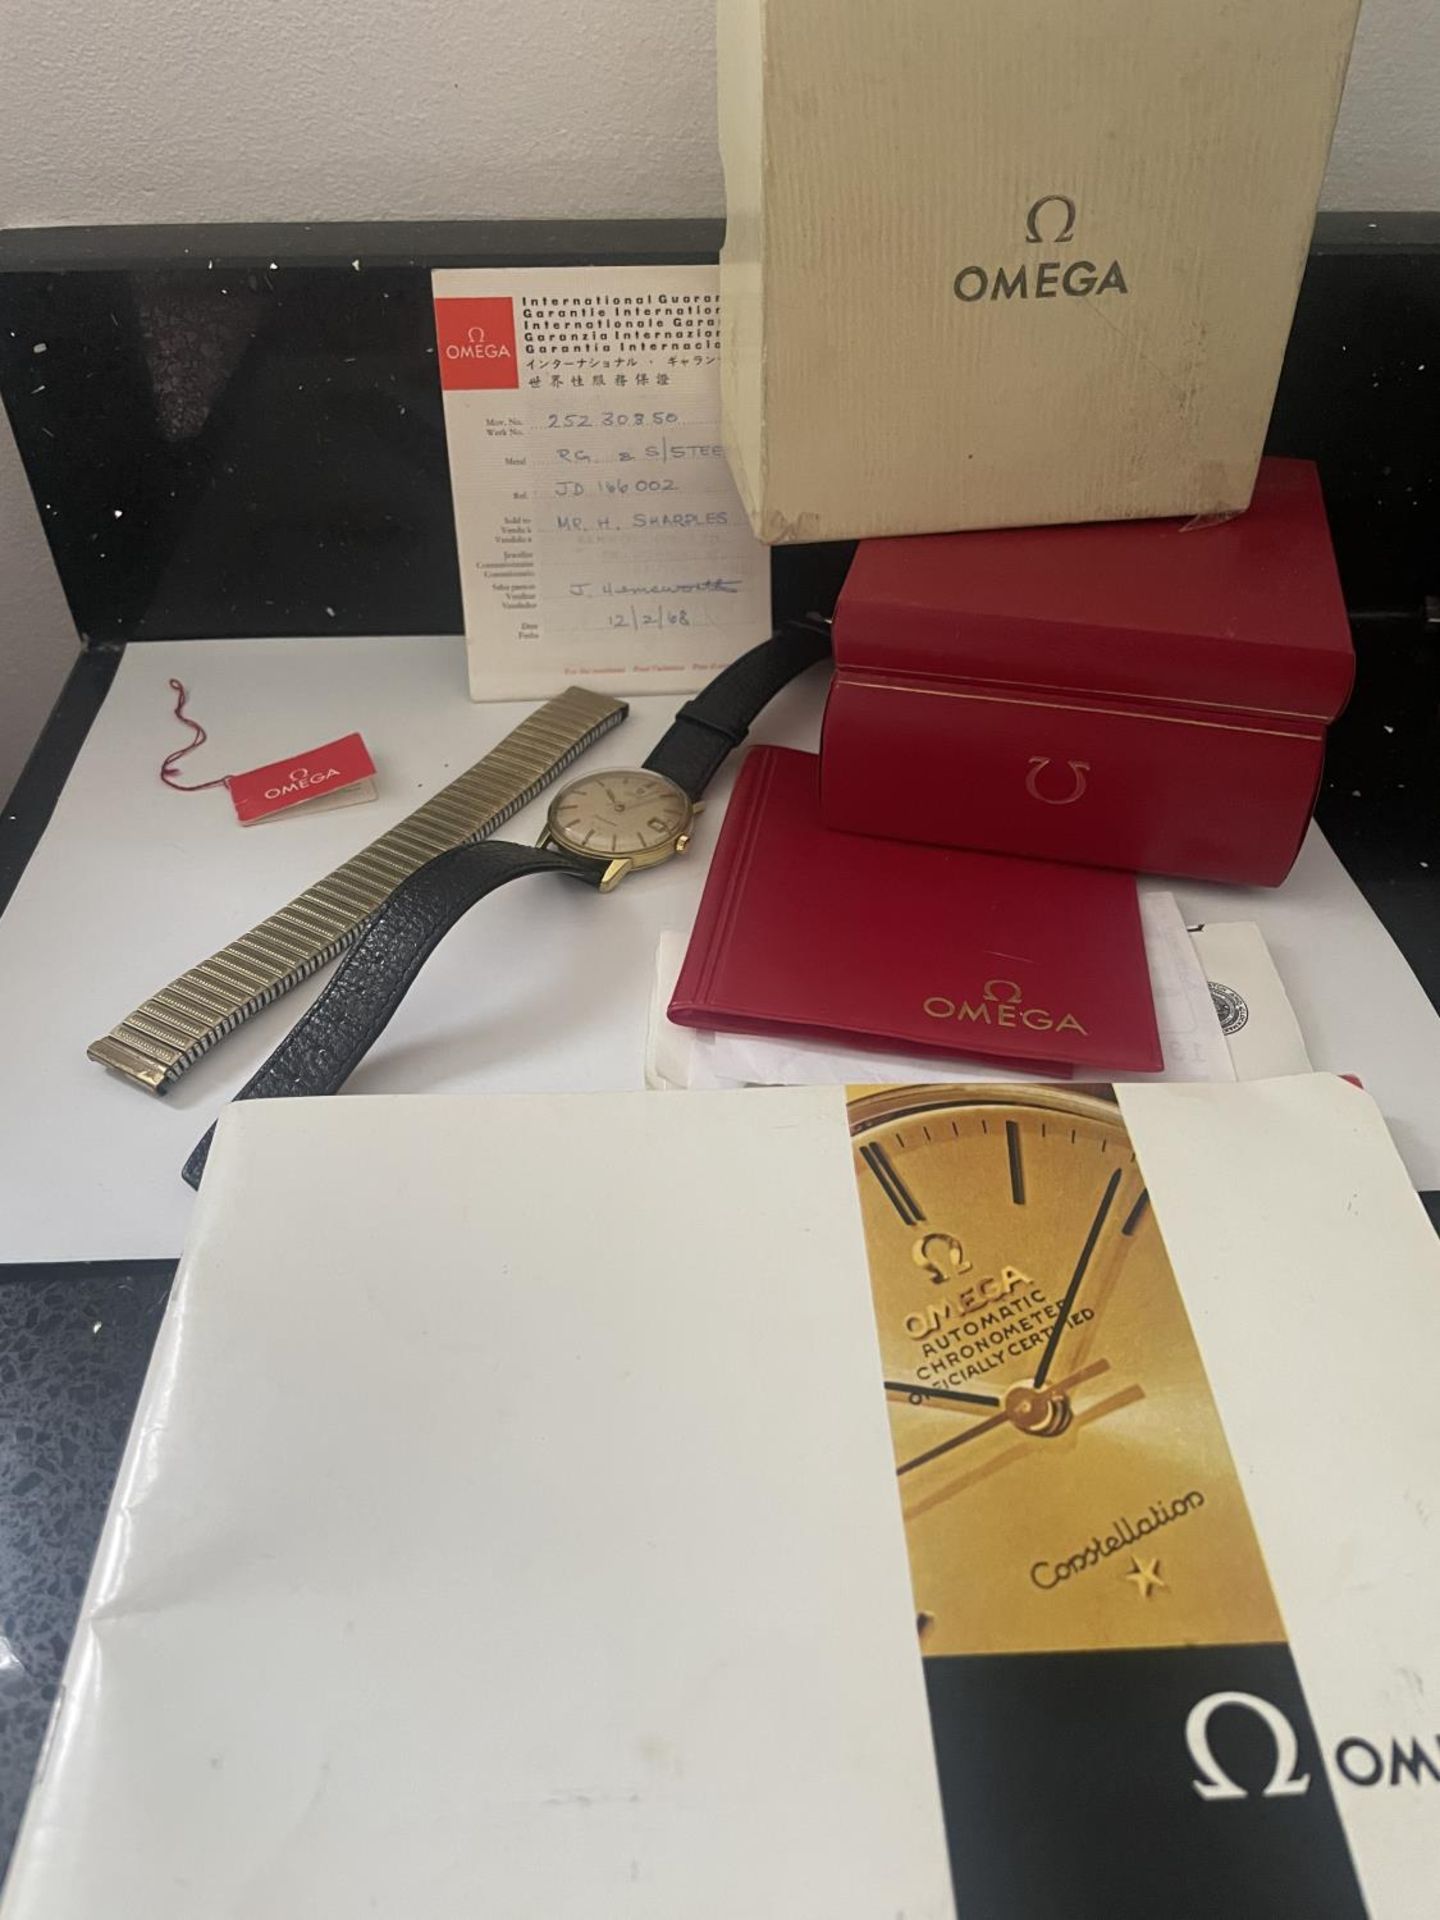 A 1968 OMEGA SEAMASTER WATCH WITH ORIGINAL GUARANTEE, BOX, LEATHER STRAP AND METAL STRAP, SERVICE